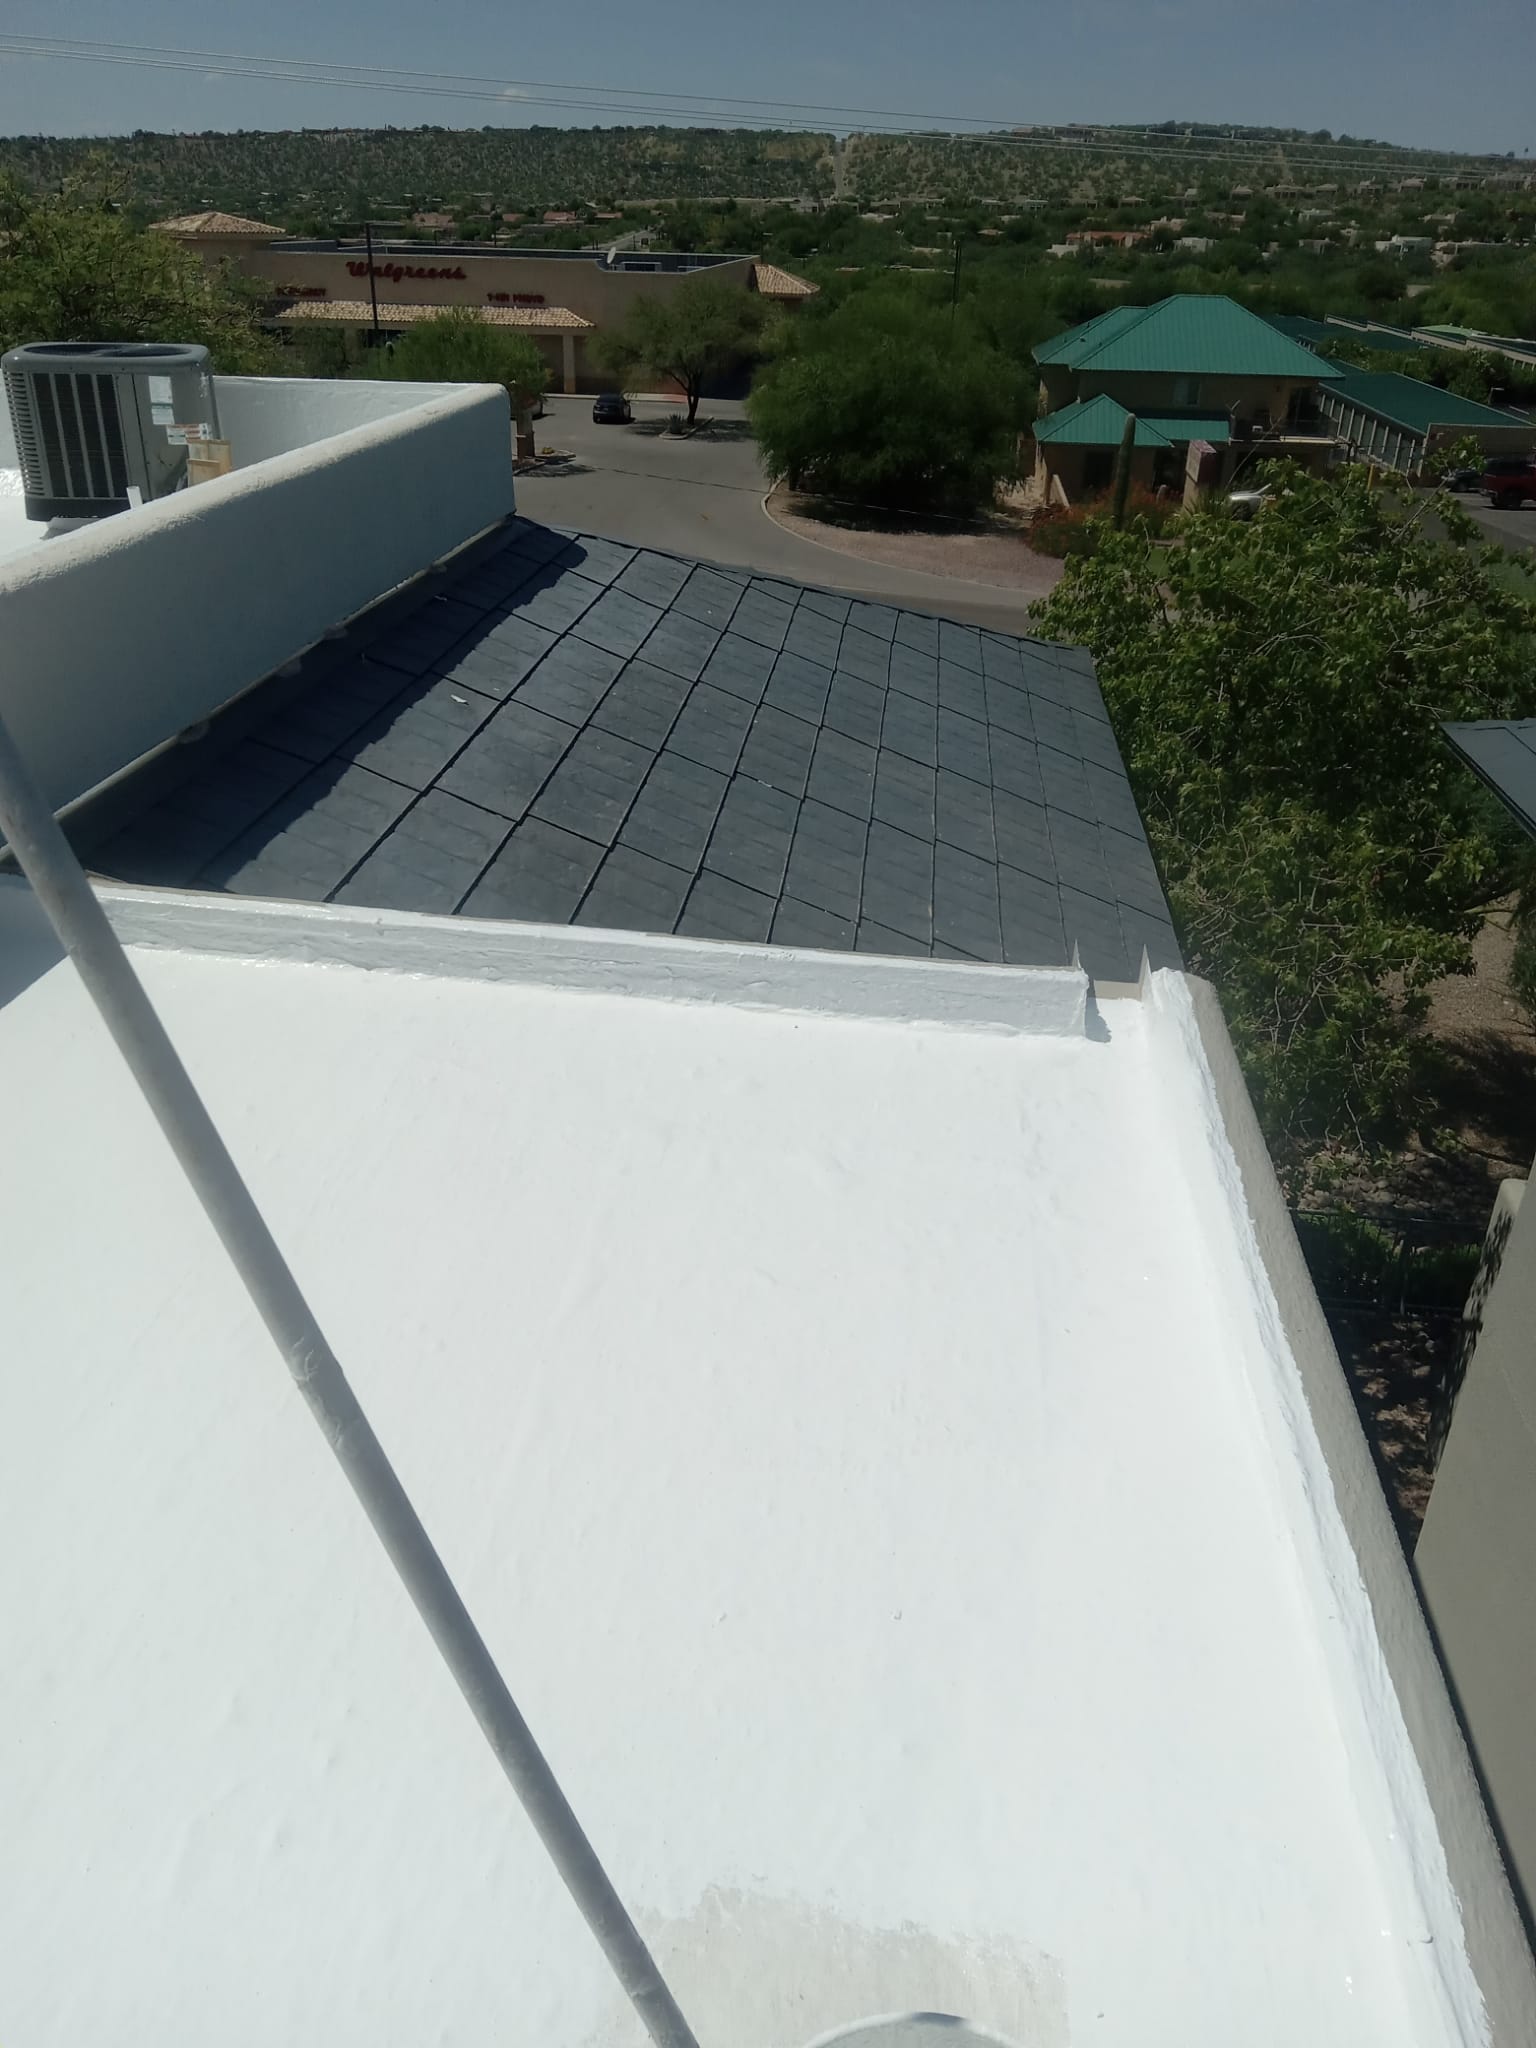 Roof in Glendale showing a unique combination of spray foam insulation and traditional tile.